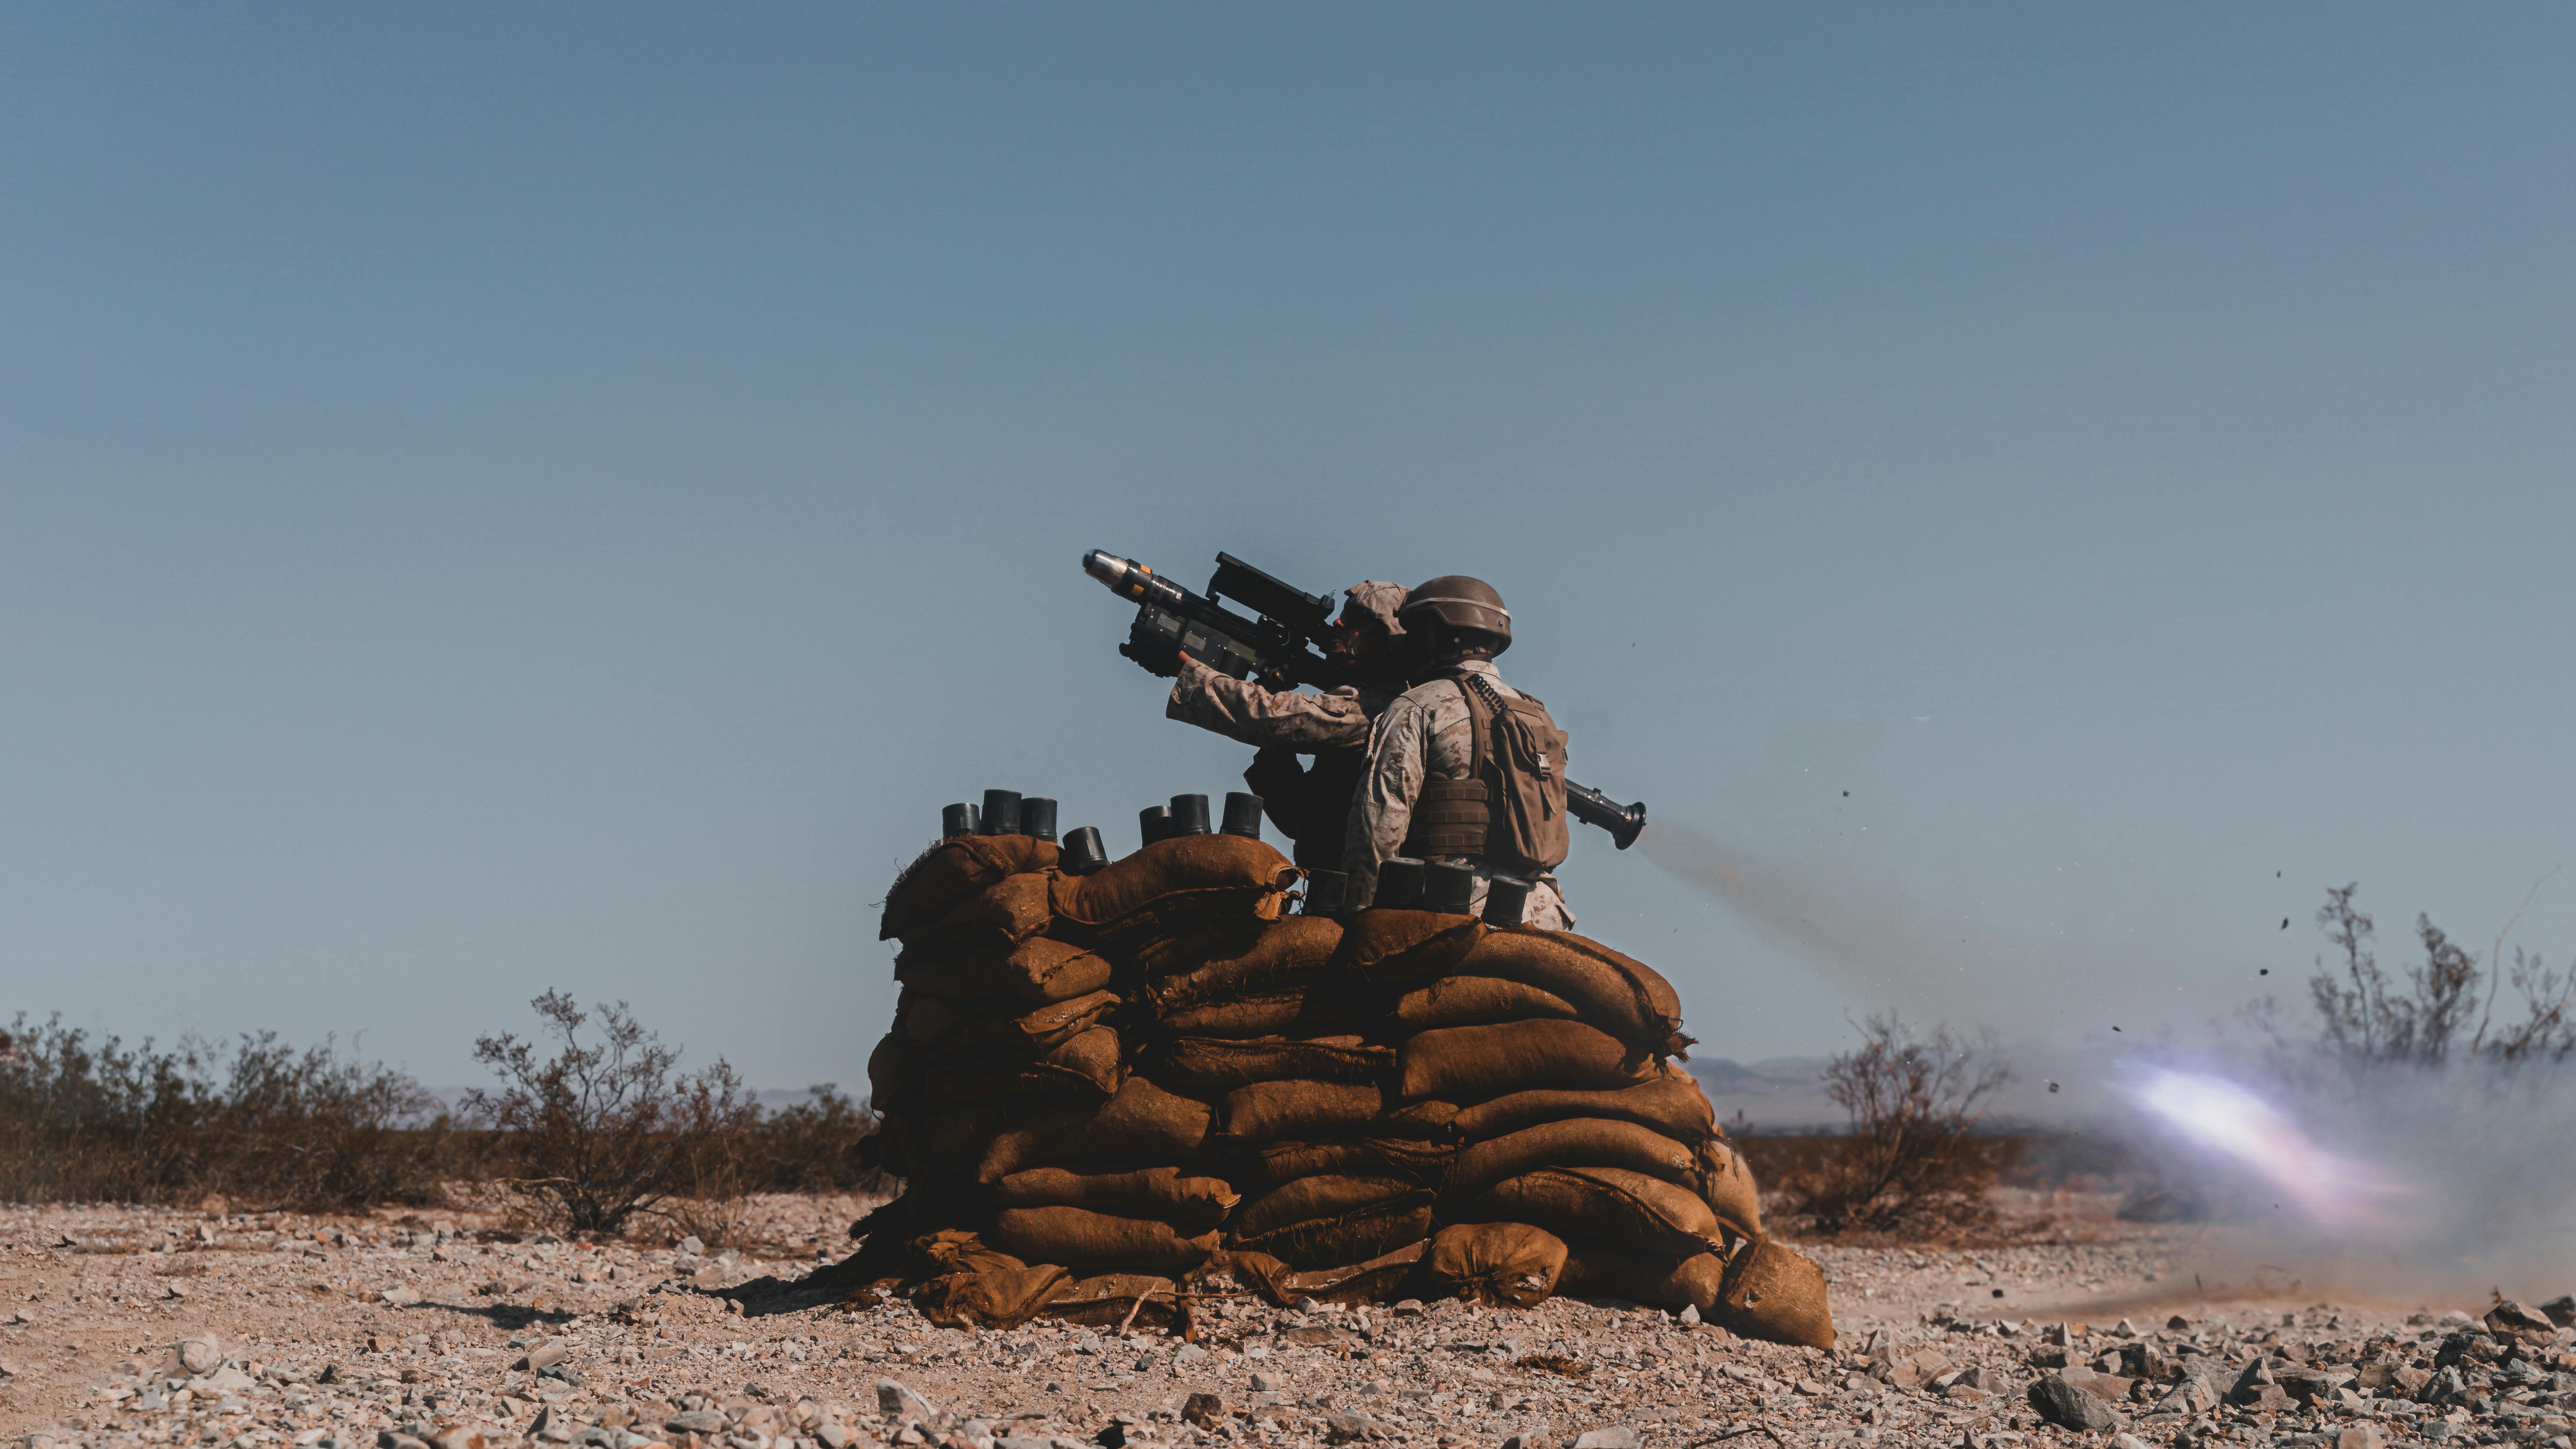 A U.S. Marine Corps Low Altitude Air Defense (LAAD) Basic Gunner Course student fires an FIM-92 Stinger missile